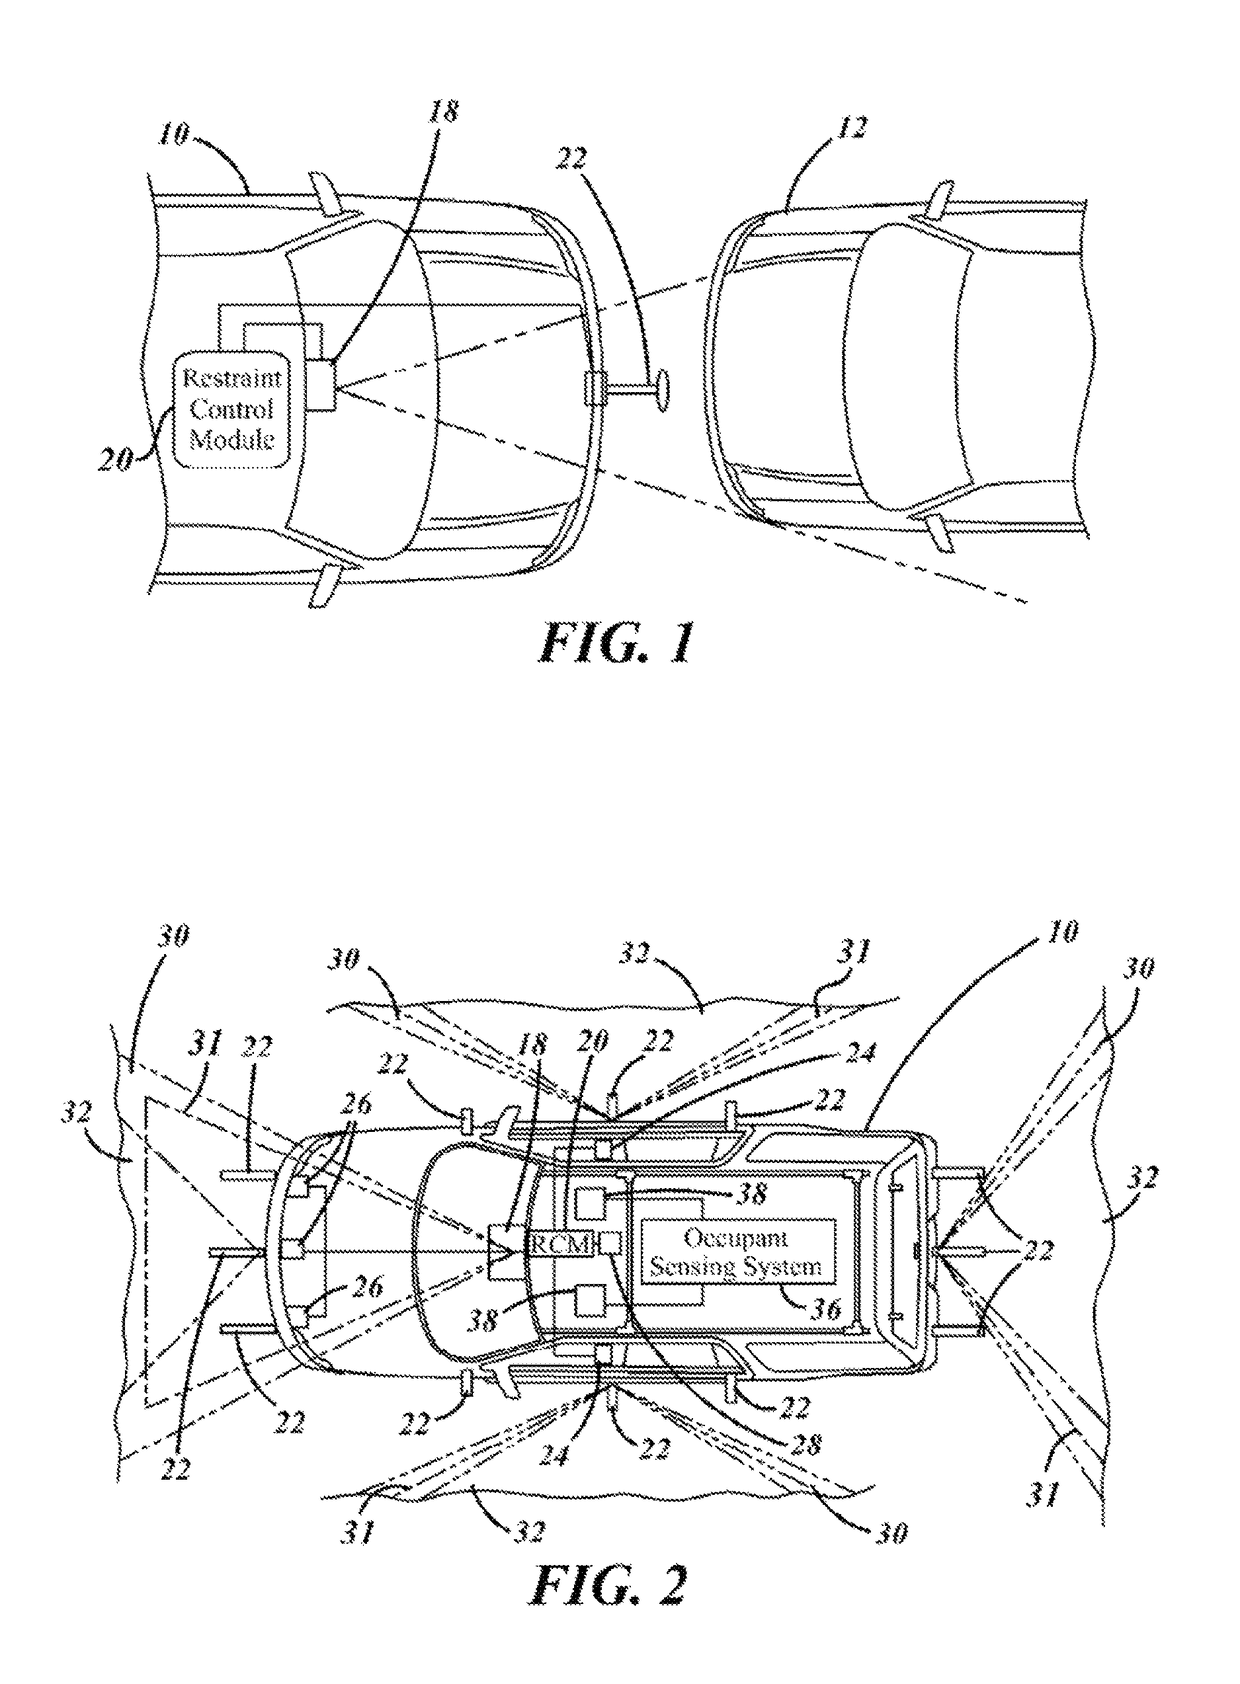 Method for operating a pre-crash sensing system to deploy airbags using confidence factors prior to collision